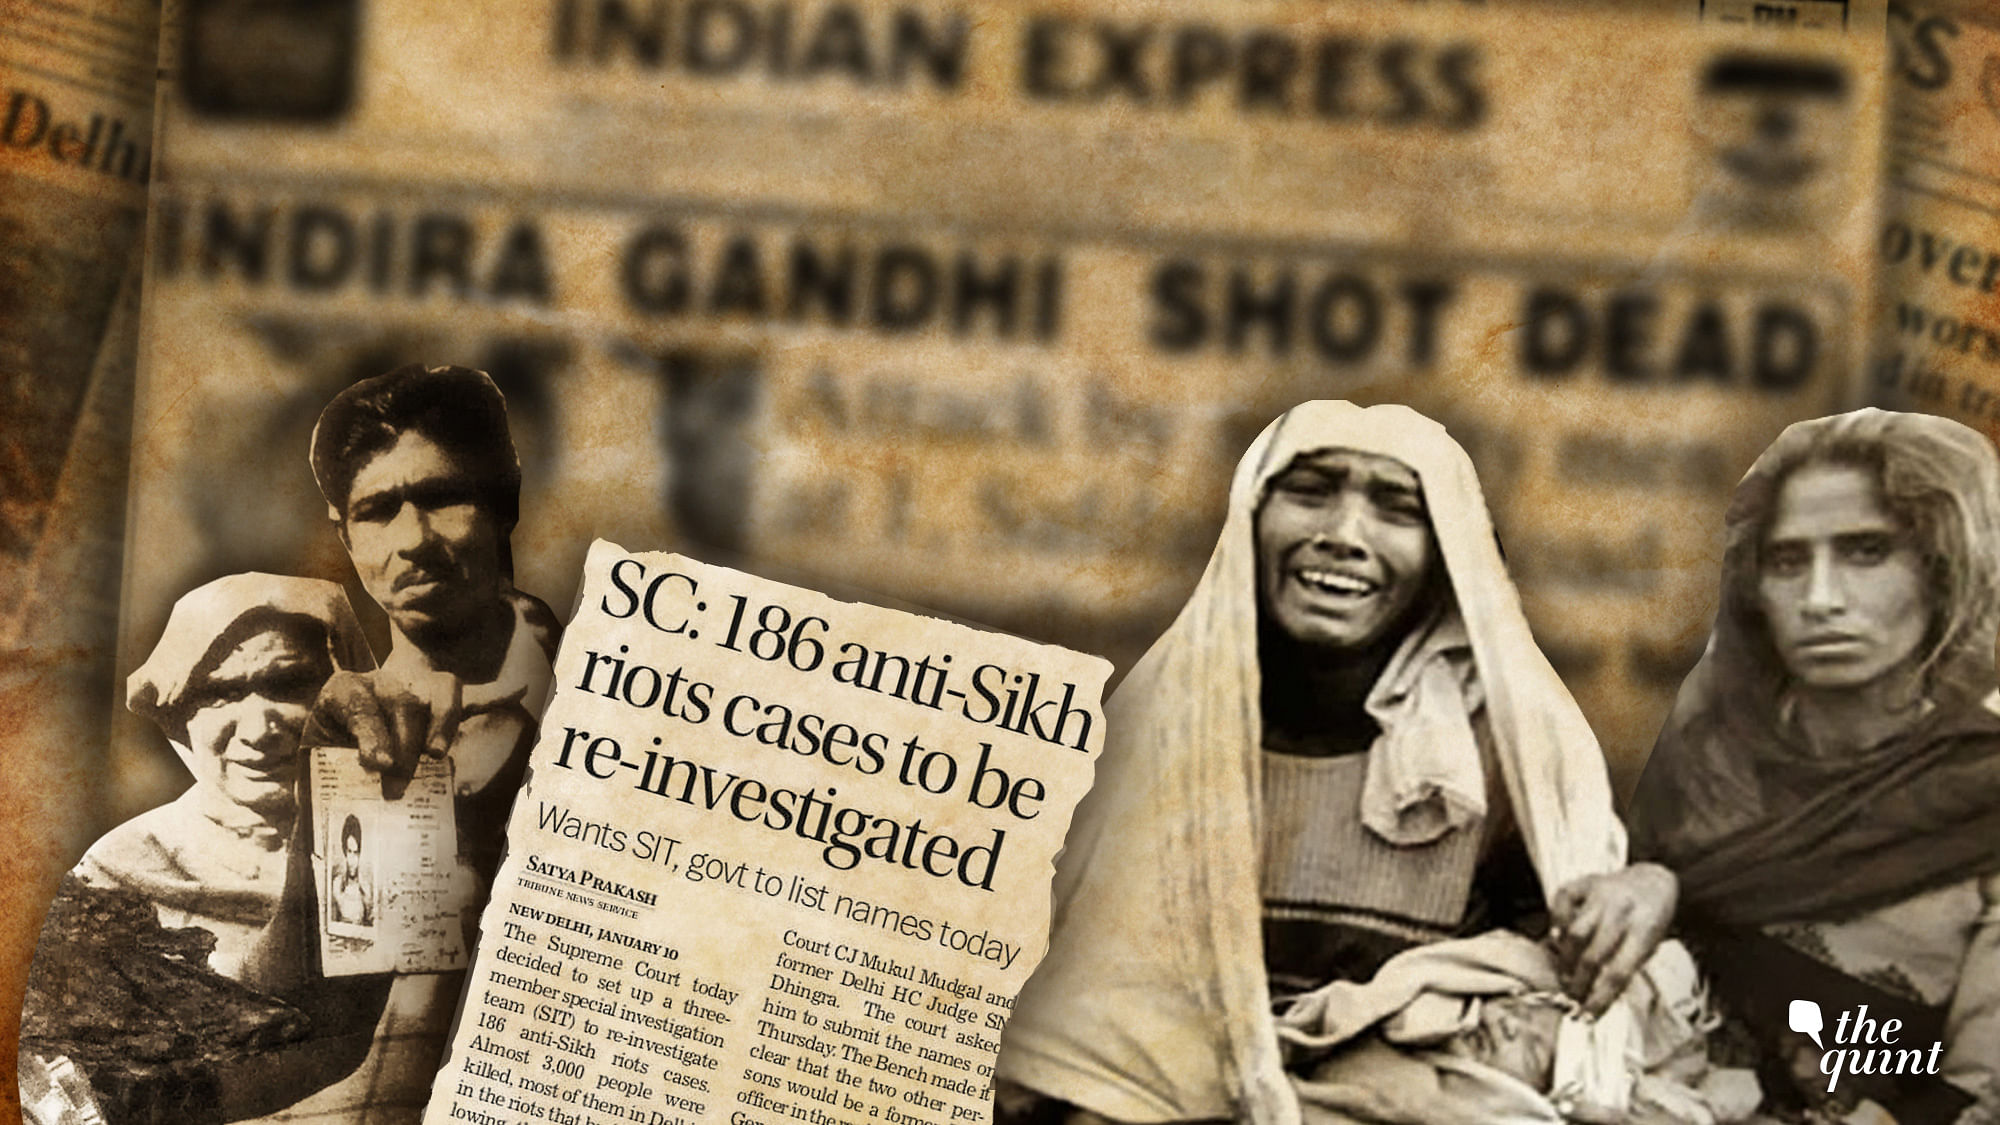 Indira Gandhi was assassinated on 31 October which led to massive communal riots on the following three days.